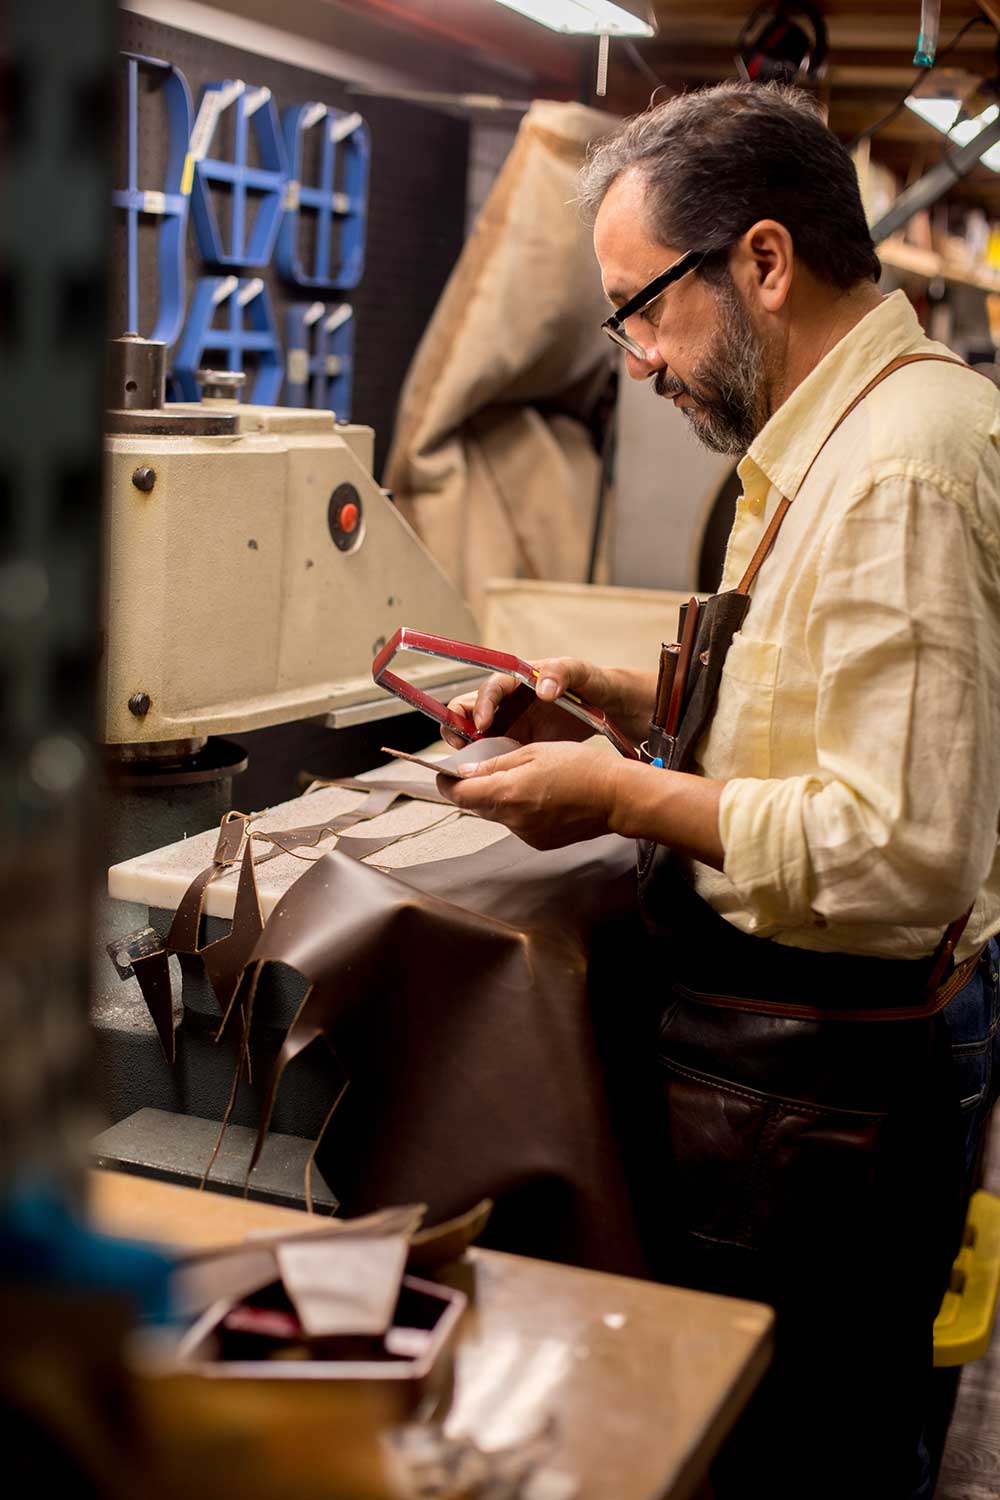 A man working with pieces of leather in a workshop